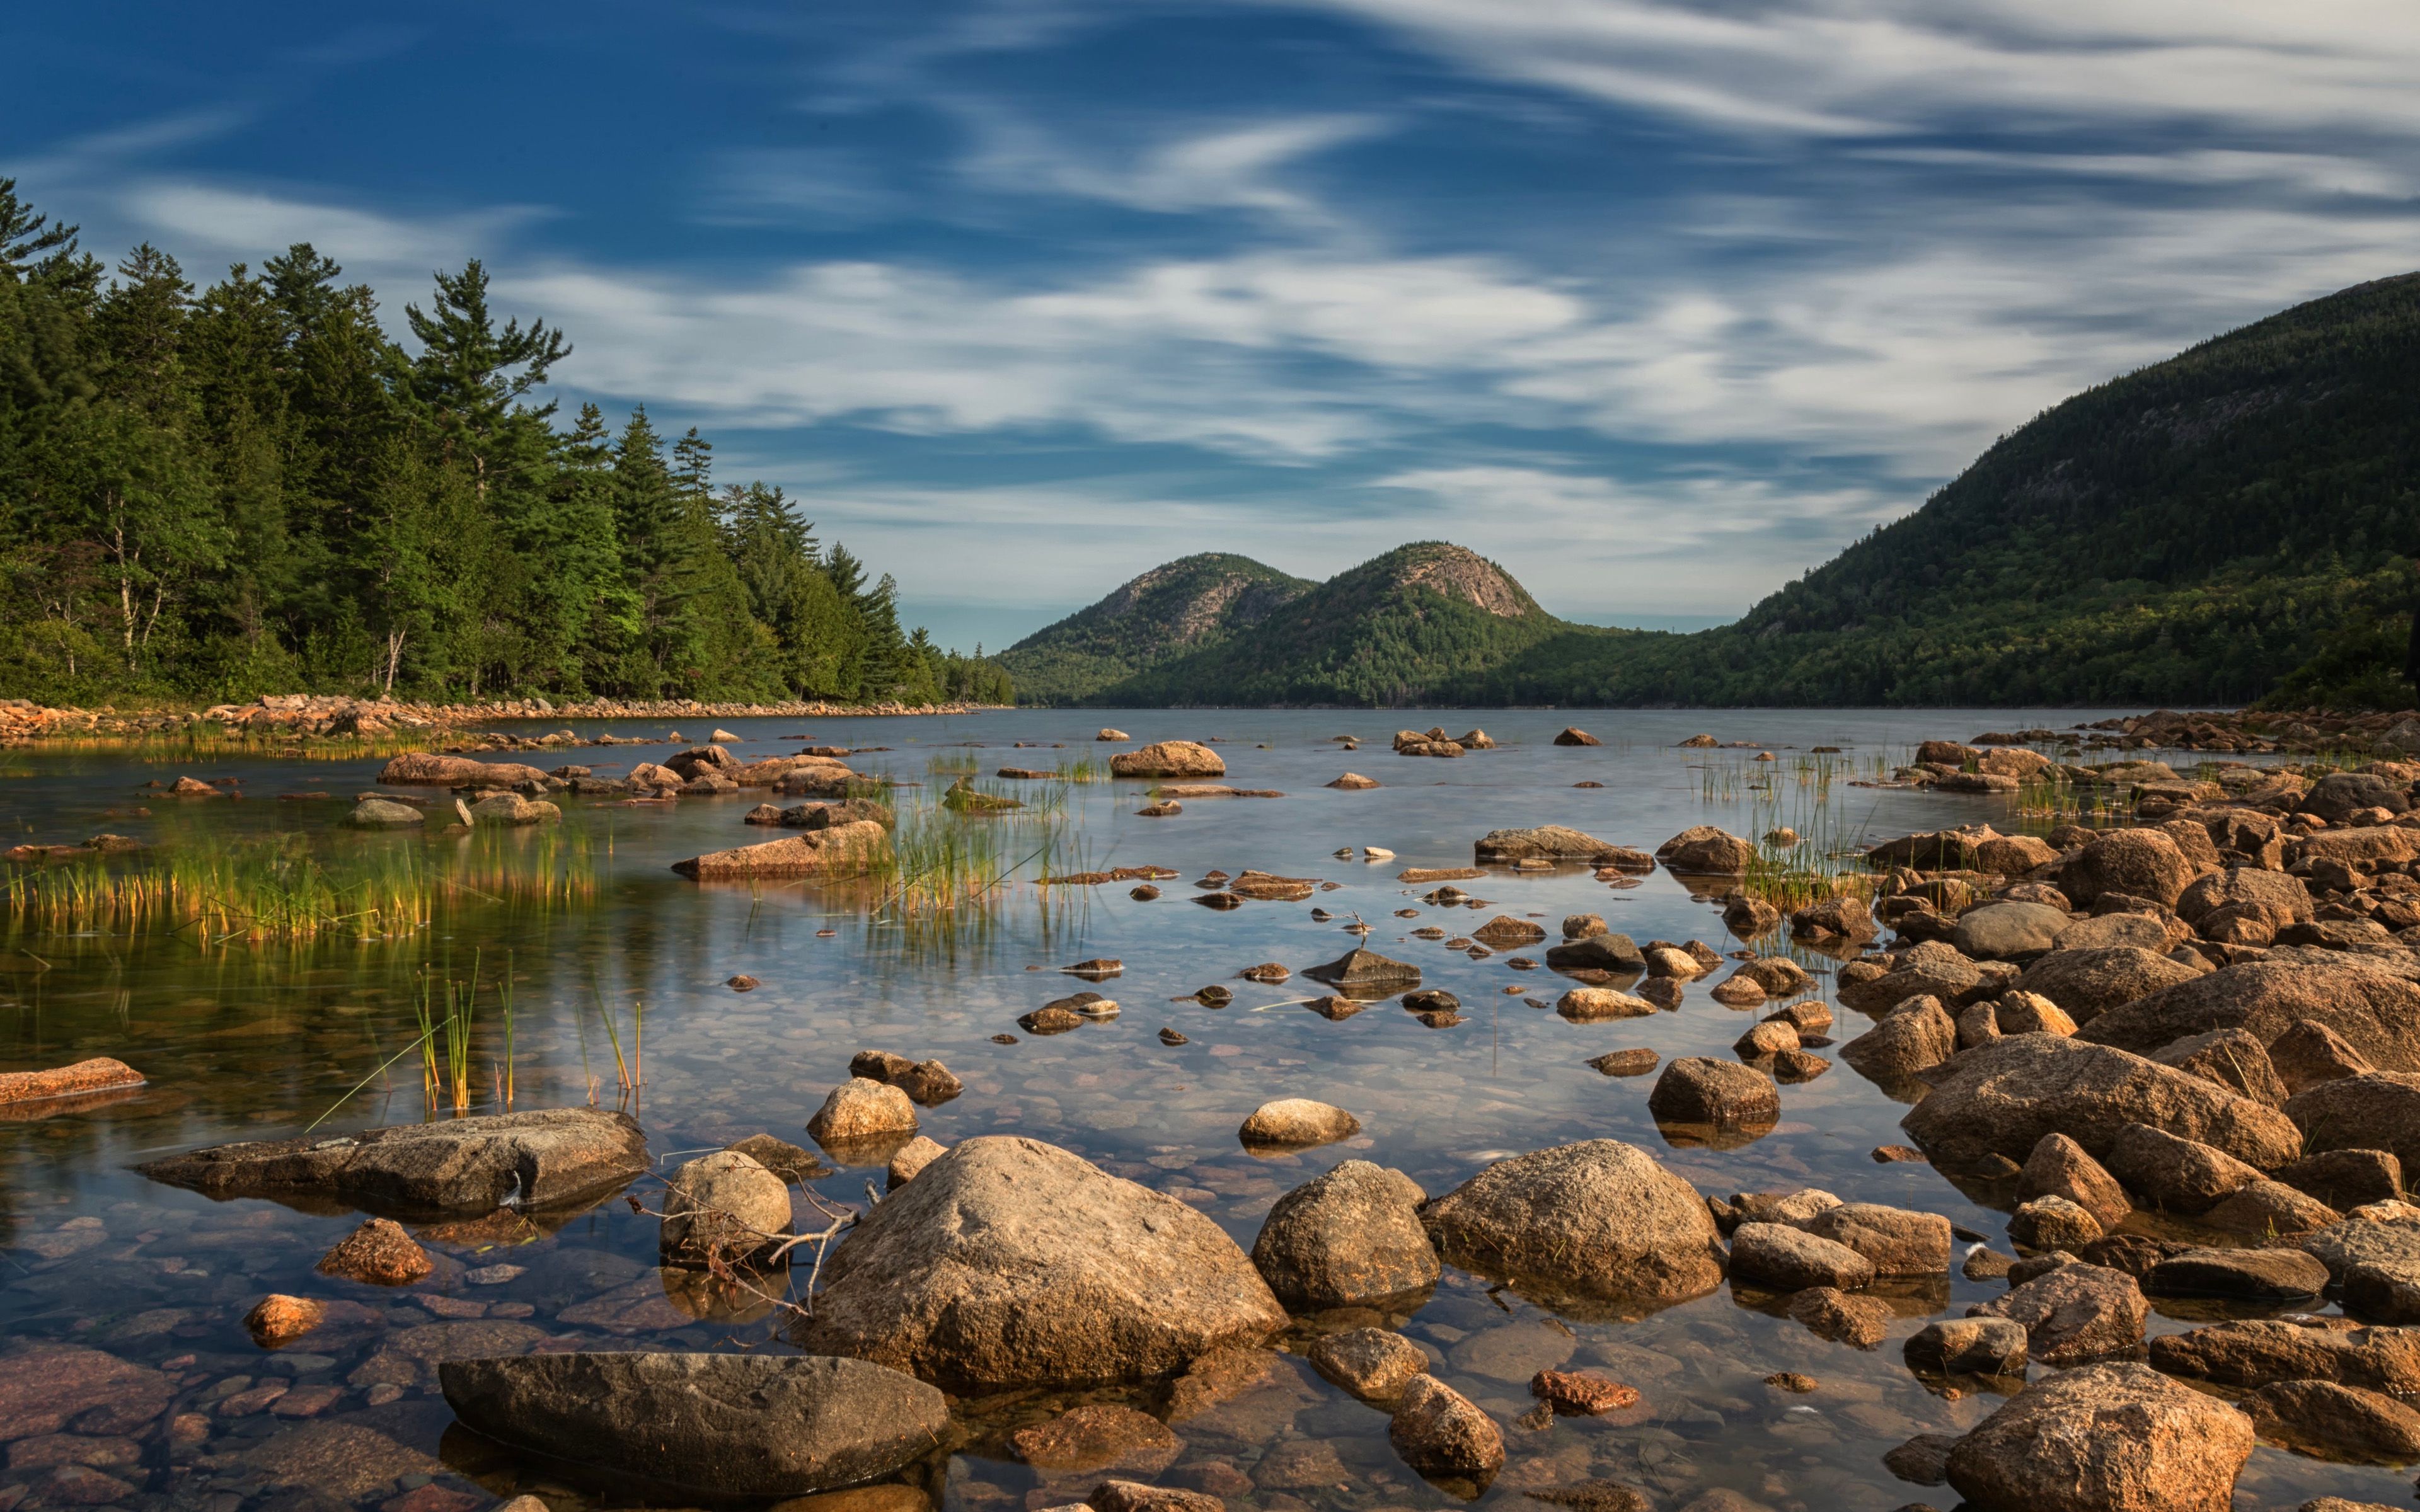 Download wallpaper Acadia National Park, 4k, lake, beautiful nature, mountains, USA, America for desktop with resolution 3840x2400. High Quality HD picture wallpaper